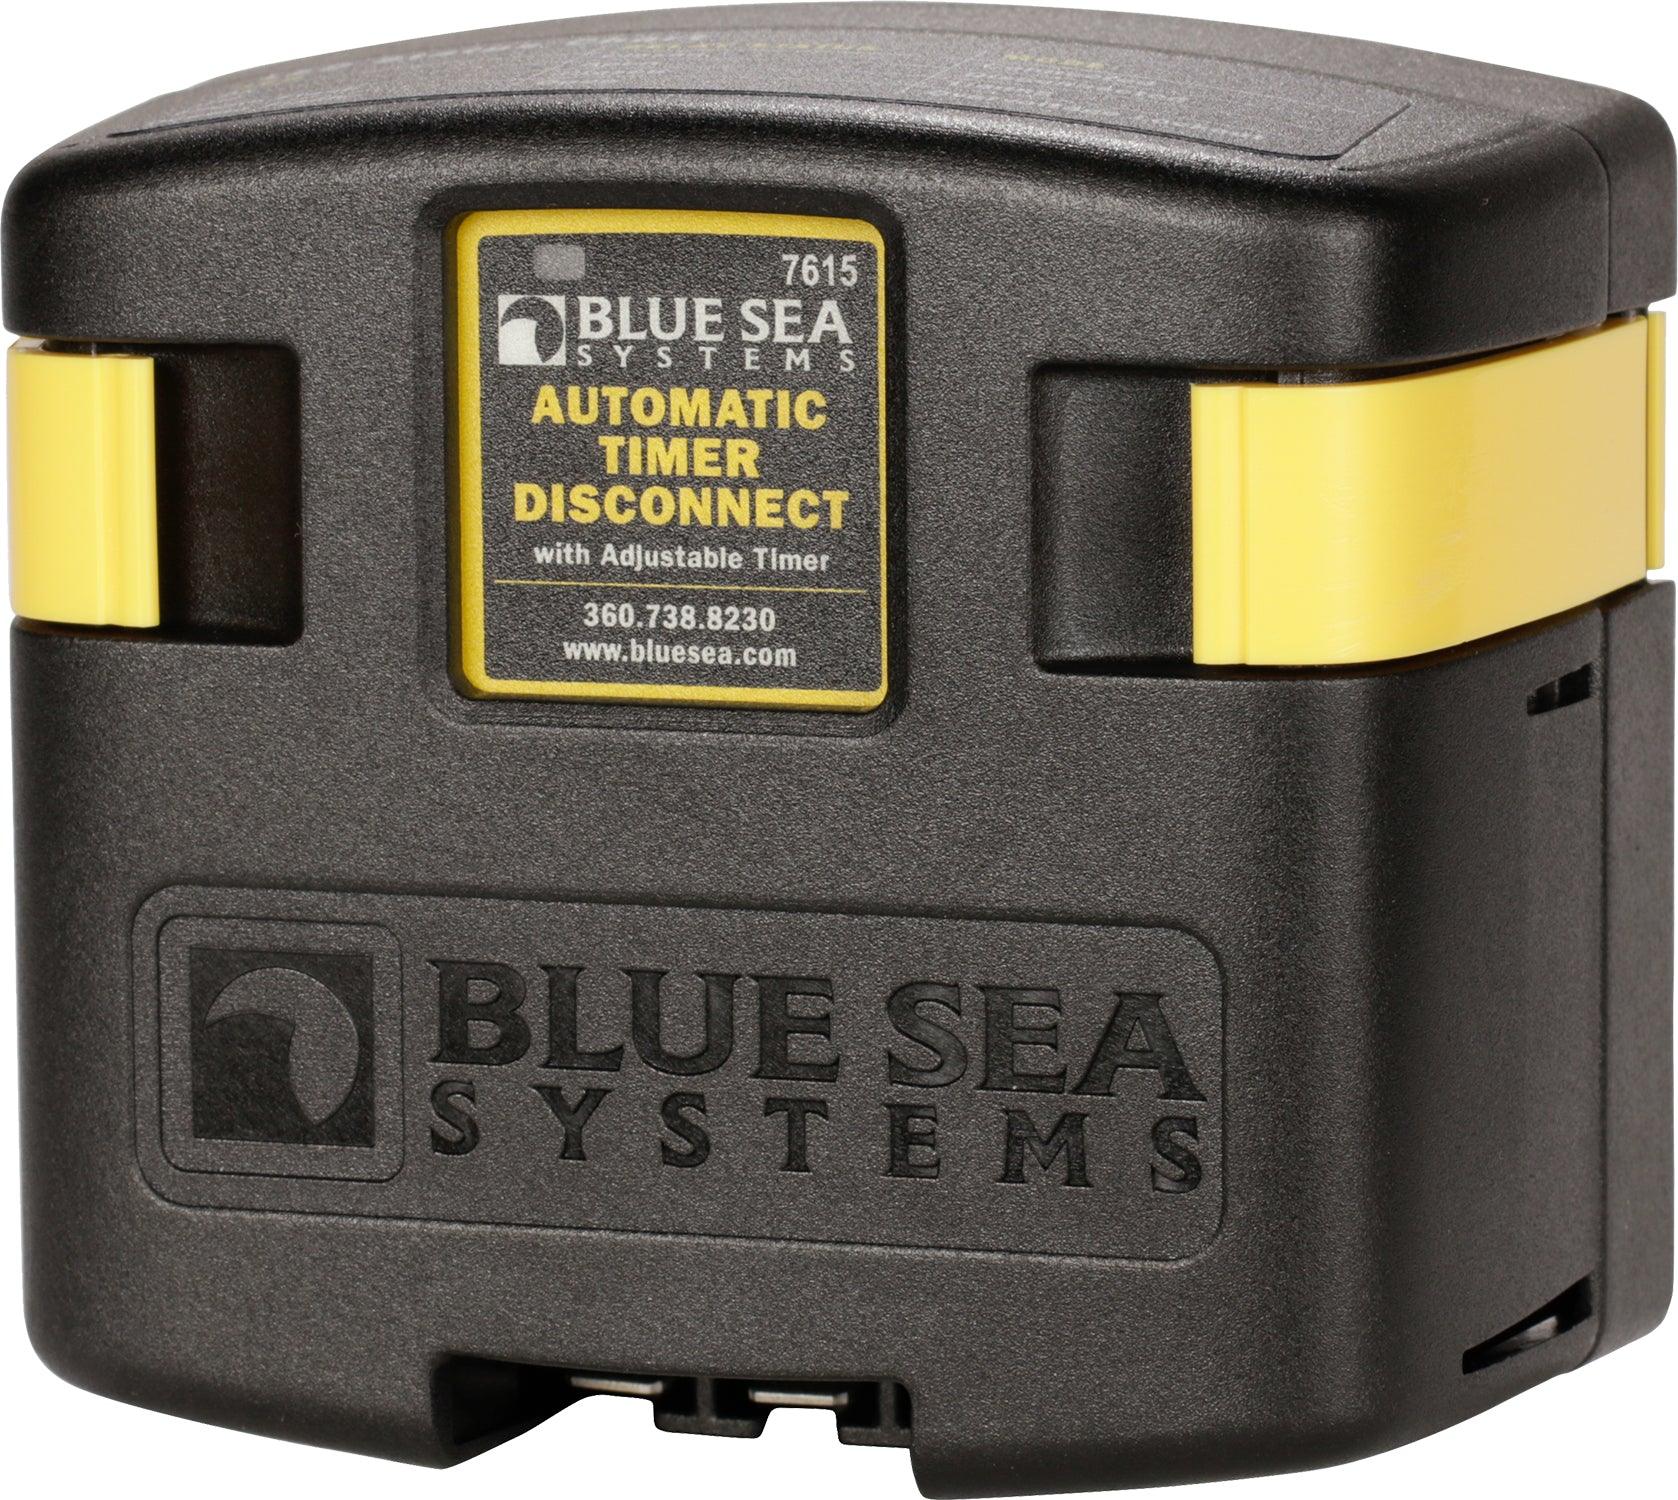 Blue Sea Automatic Timer Disconnect 12vdc - Boat Gear USA